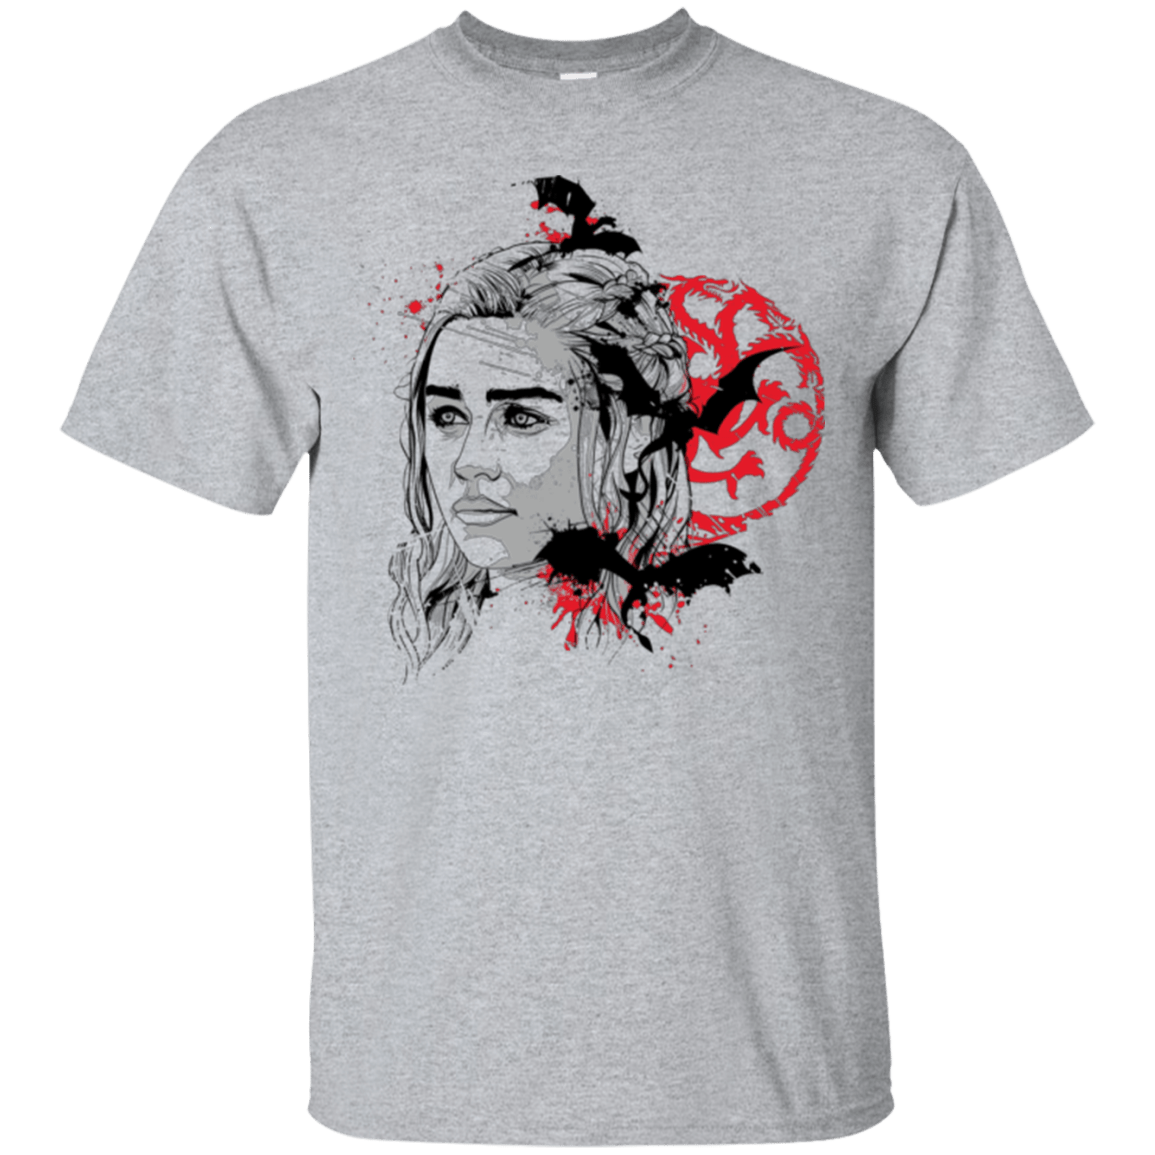 T-Shirts Sport Grey / Small MOTHER OF DRAGONS (1) T-Shirt